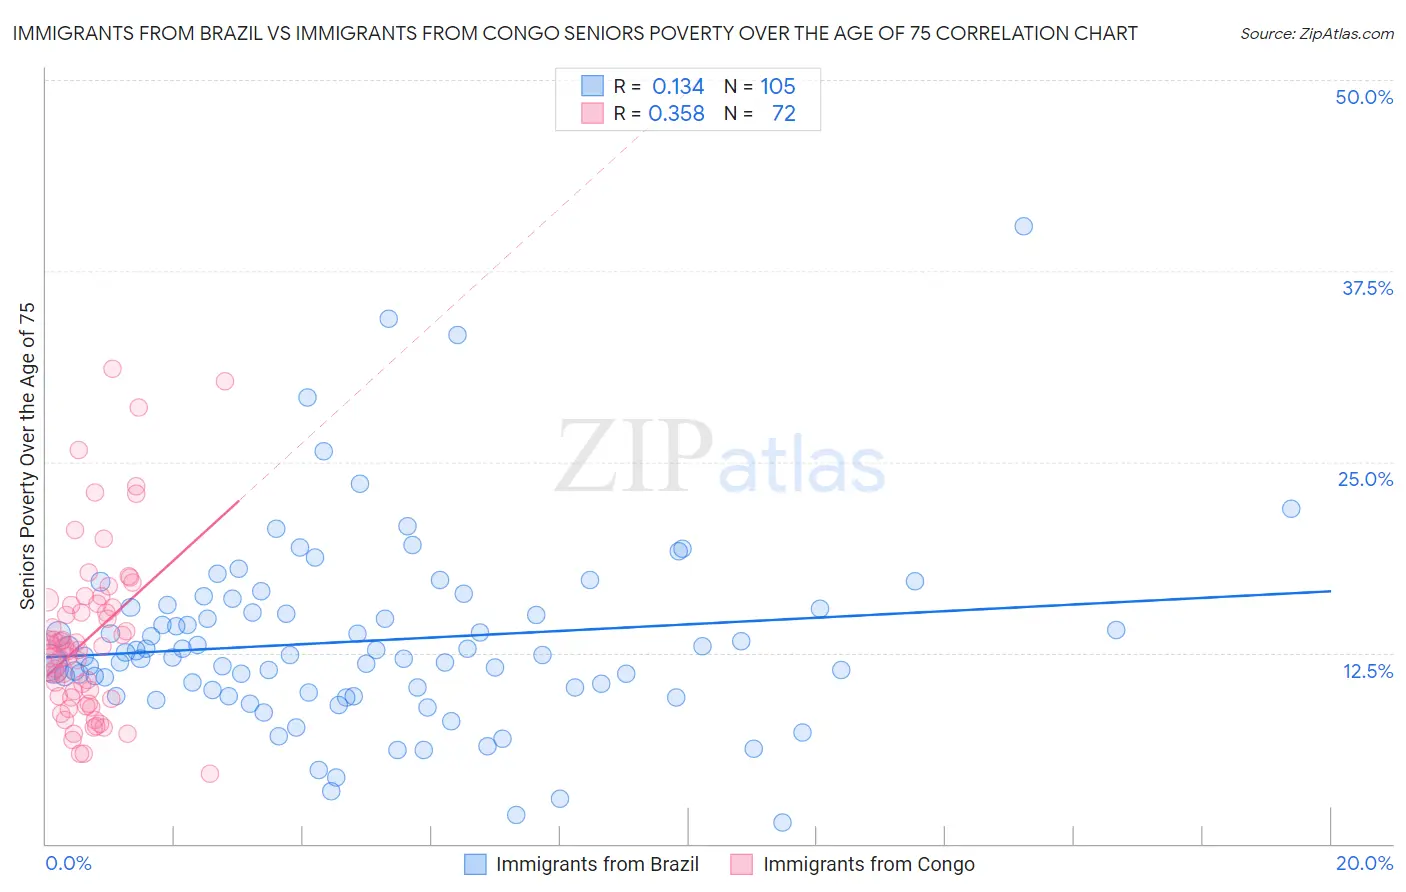 Immigrants from Brazil vs Immigrants from Congo Seniors Poverty Over the Age of 75